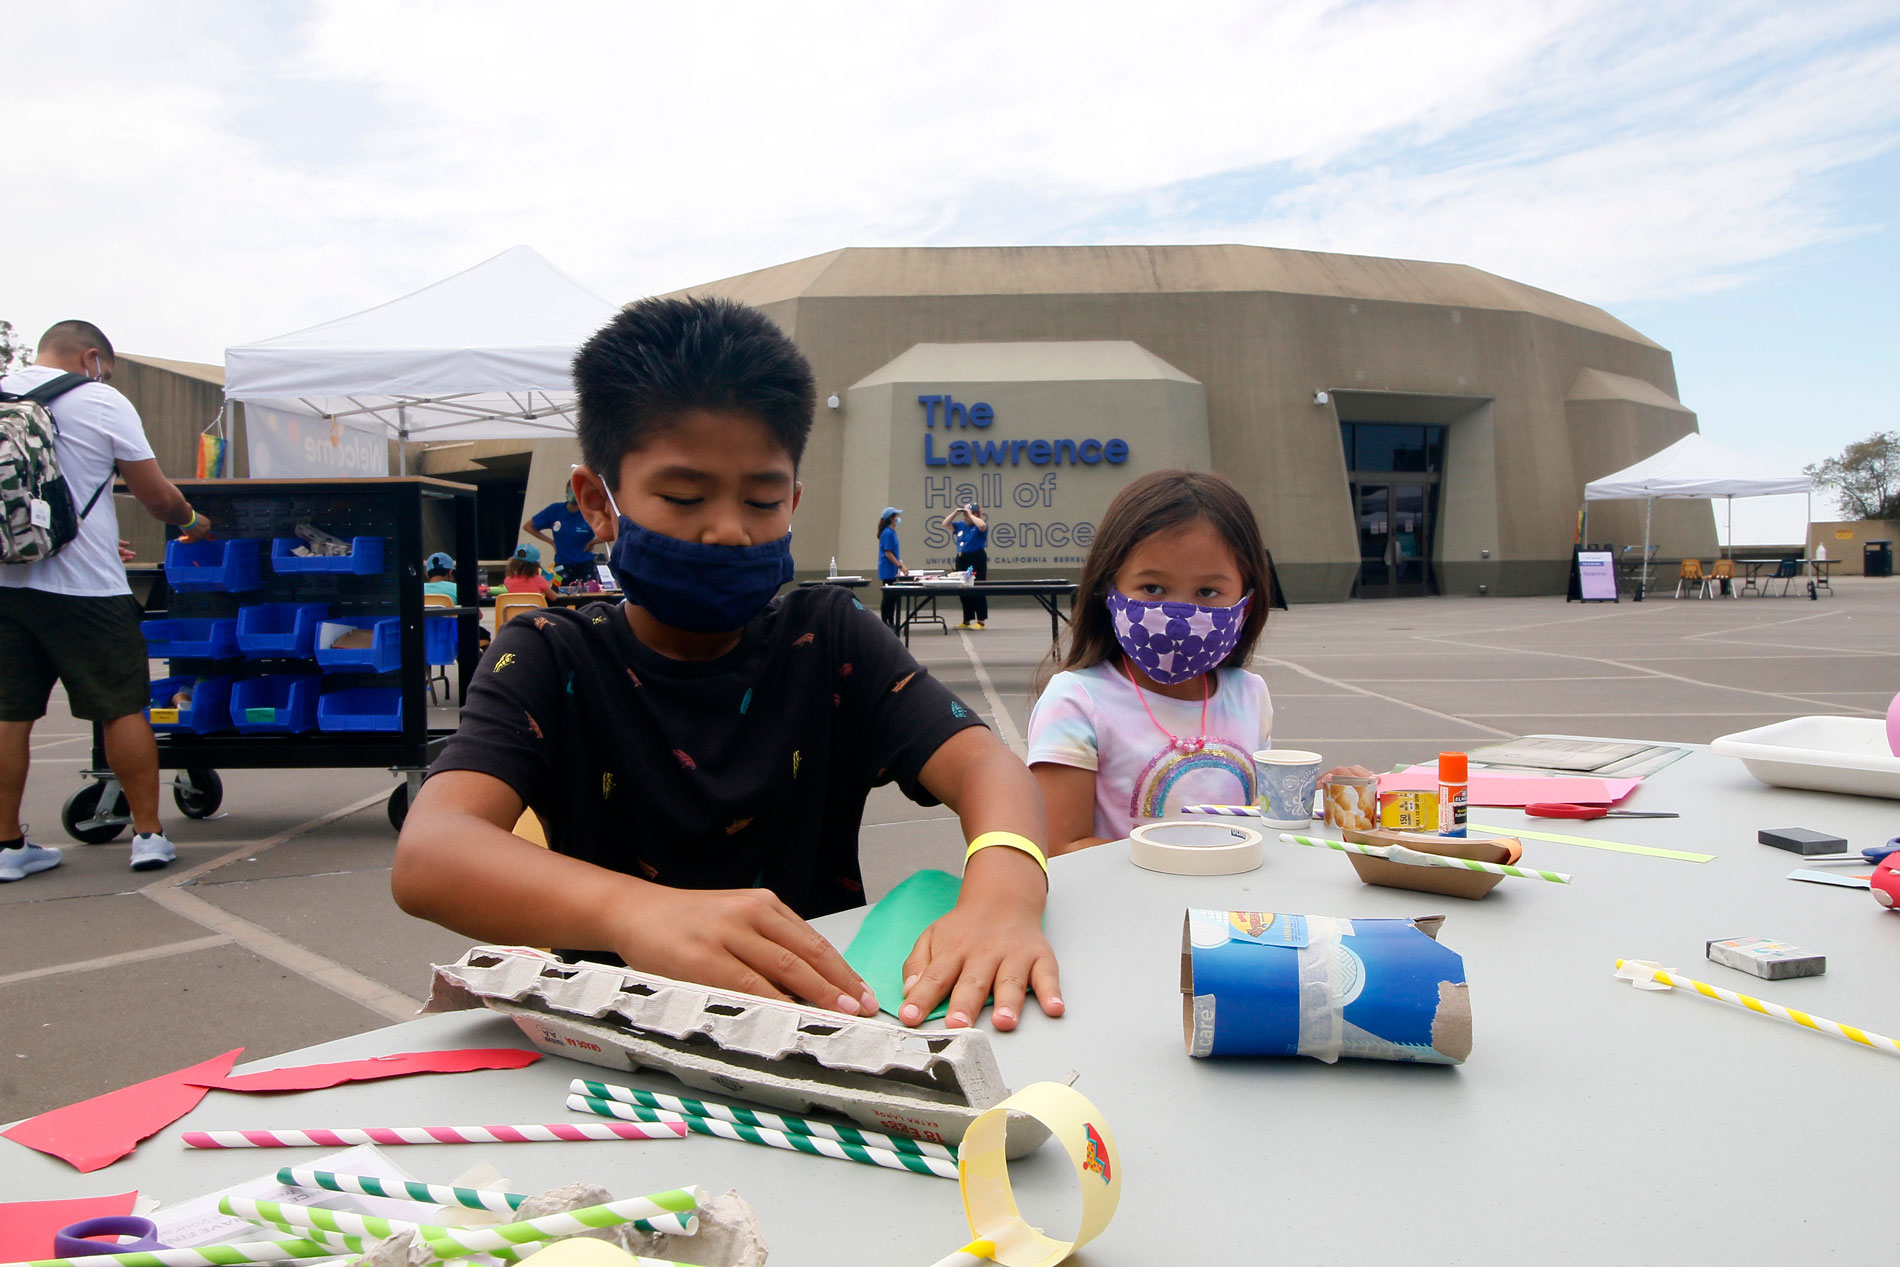 Two children constructing paper sculptures during Summer Fundays at The Lawrence